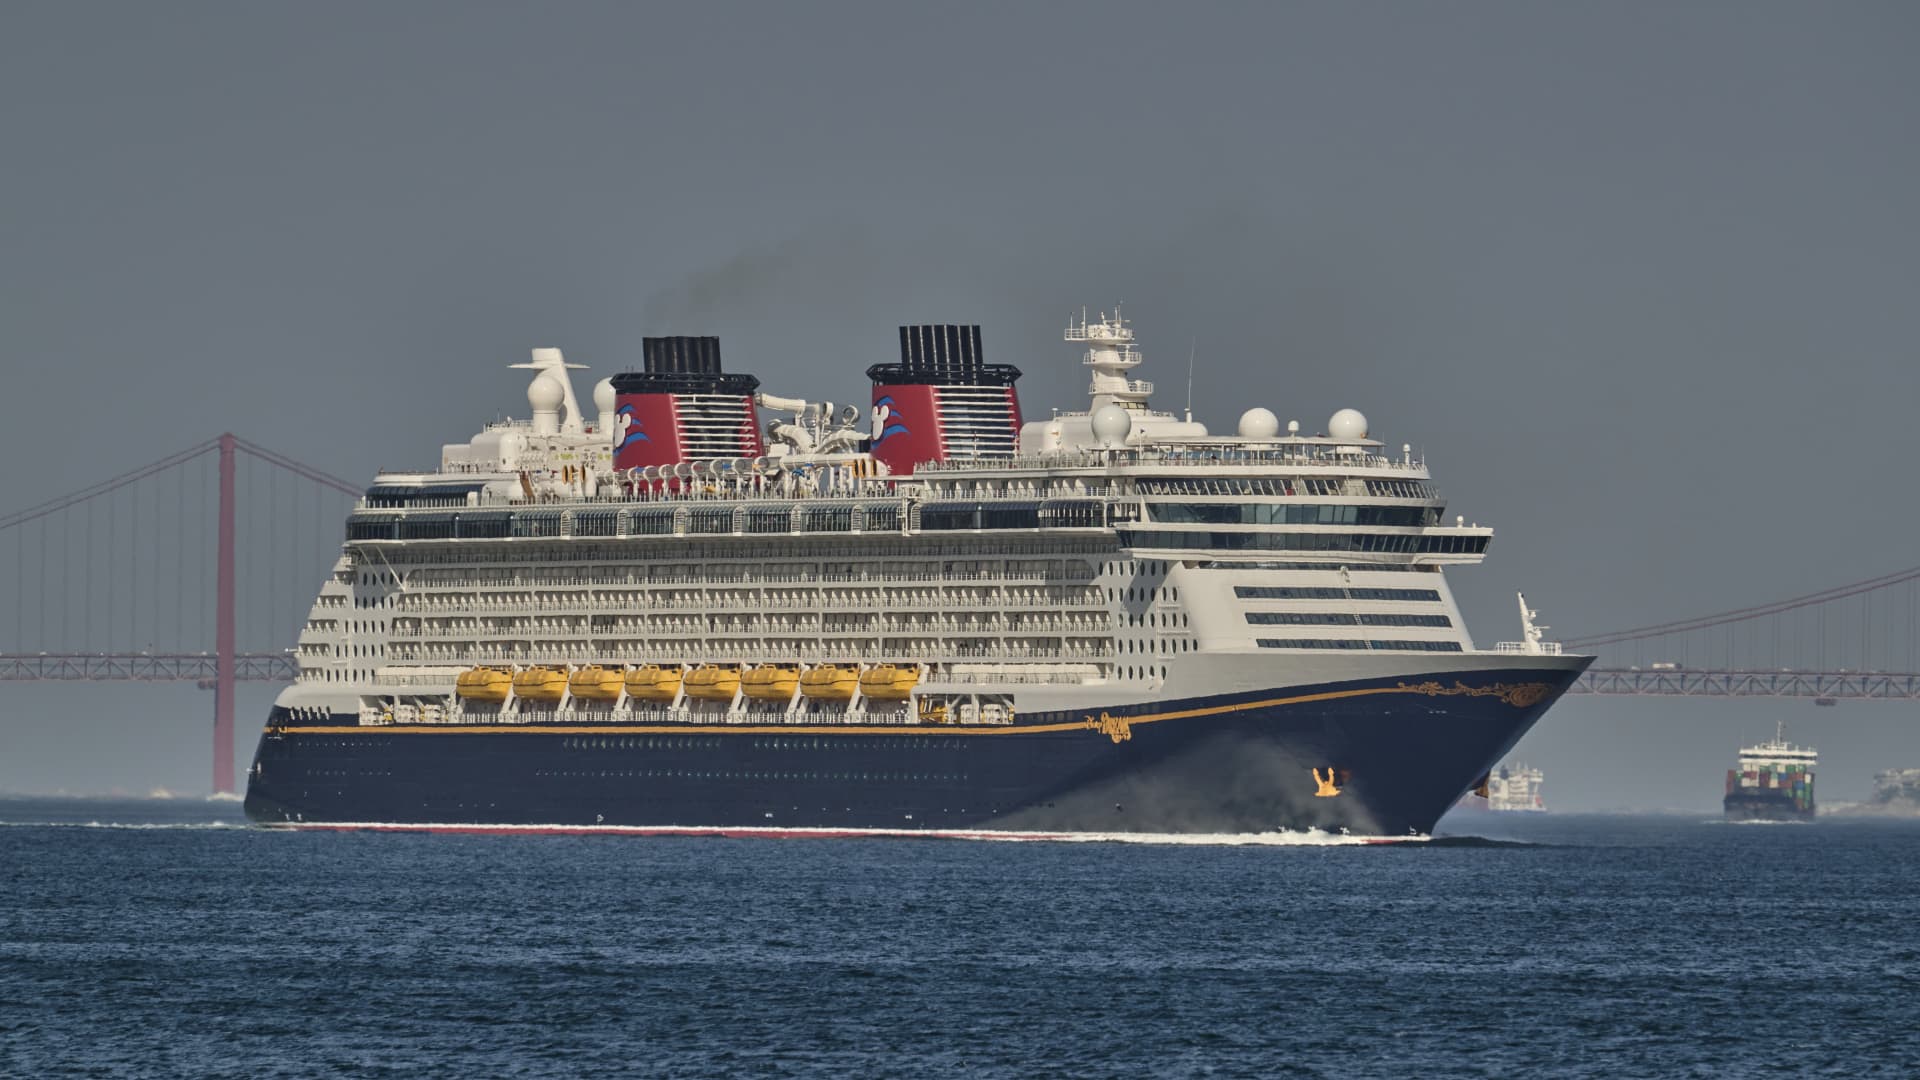 According to travelers, Disney Cruise Line is the best cruise for families.